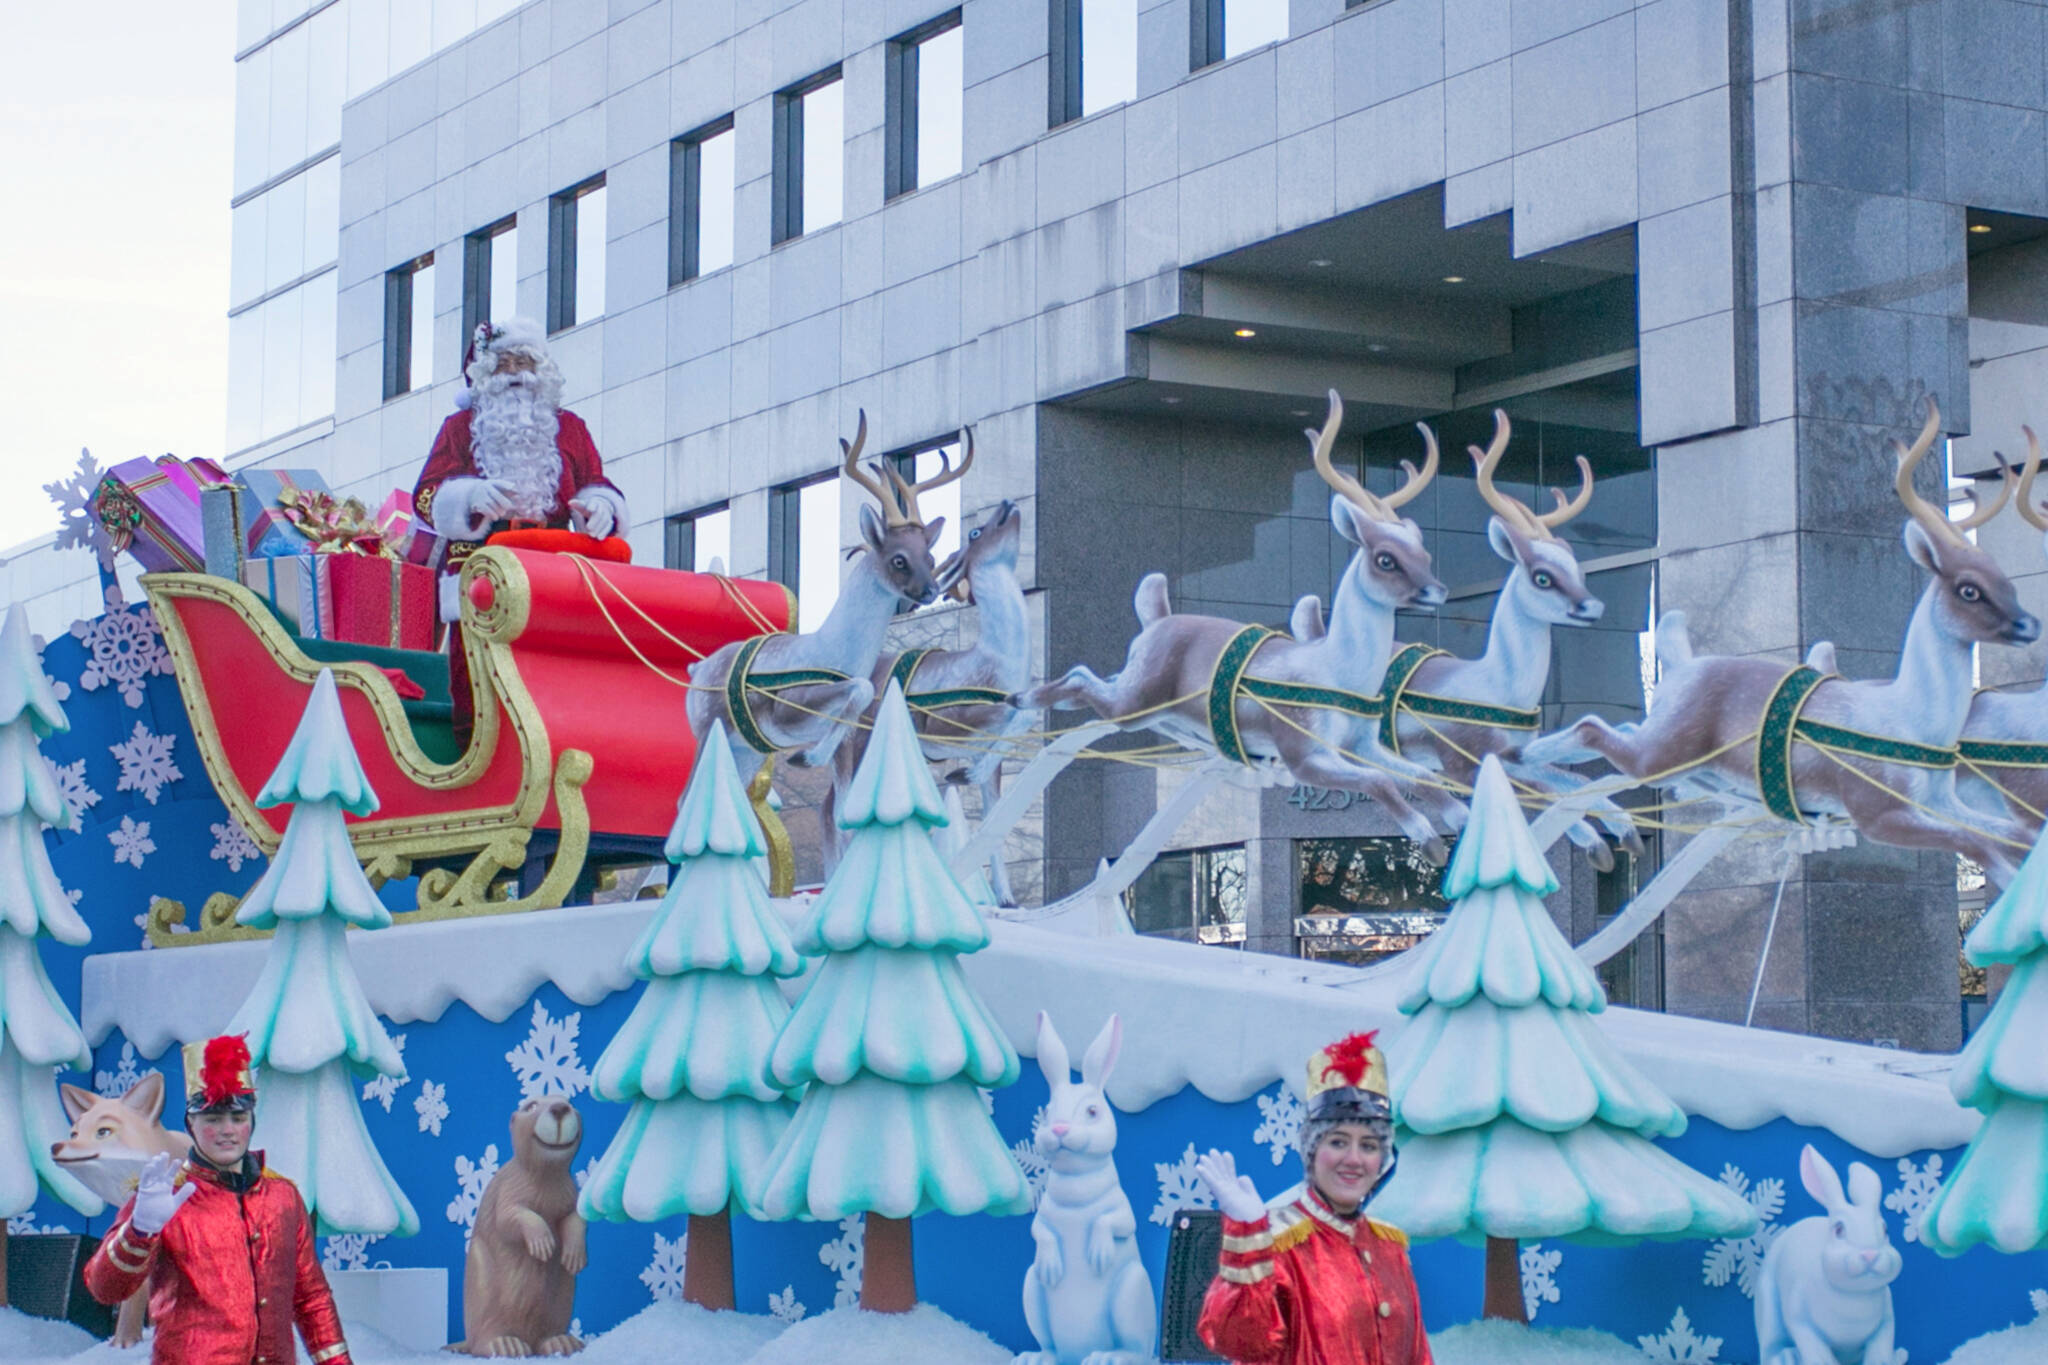 Toronto is still getting a Santa Claus Parade in 2020 but spectators